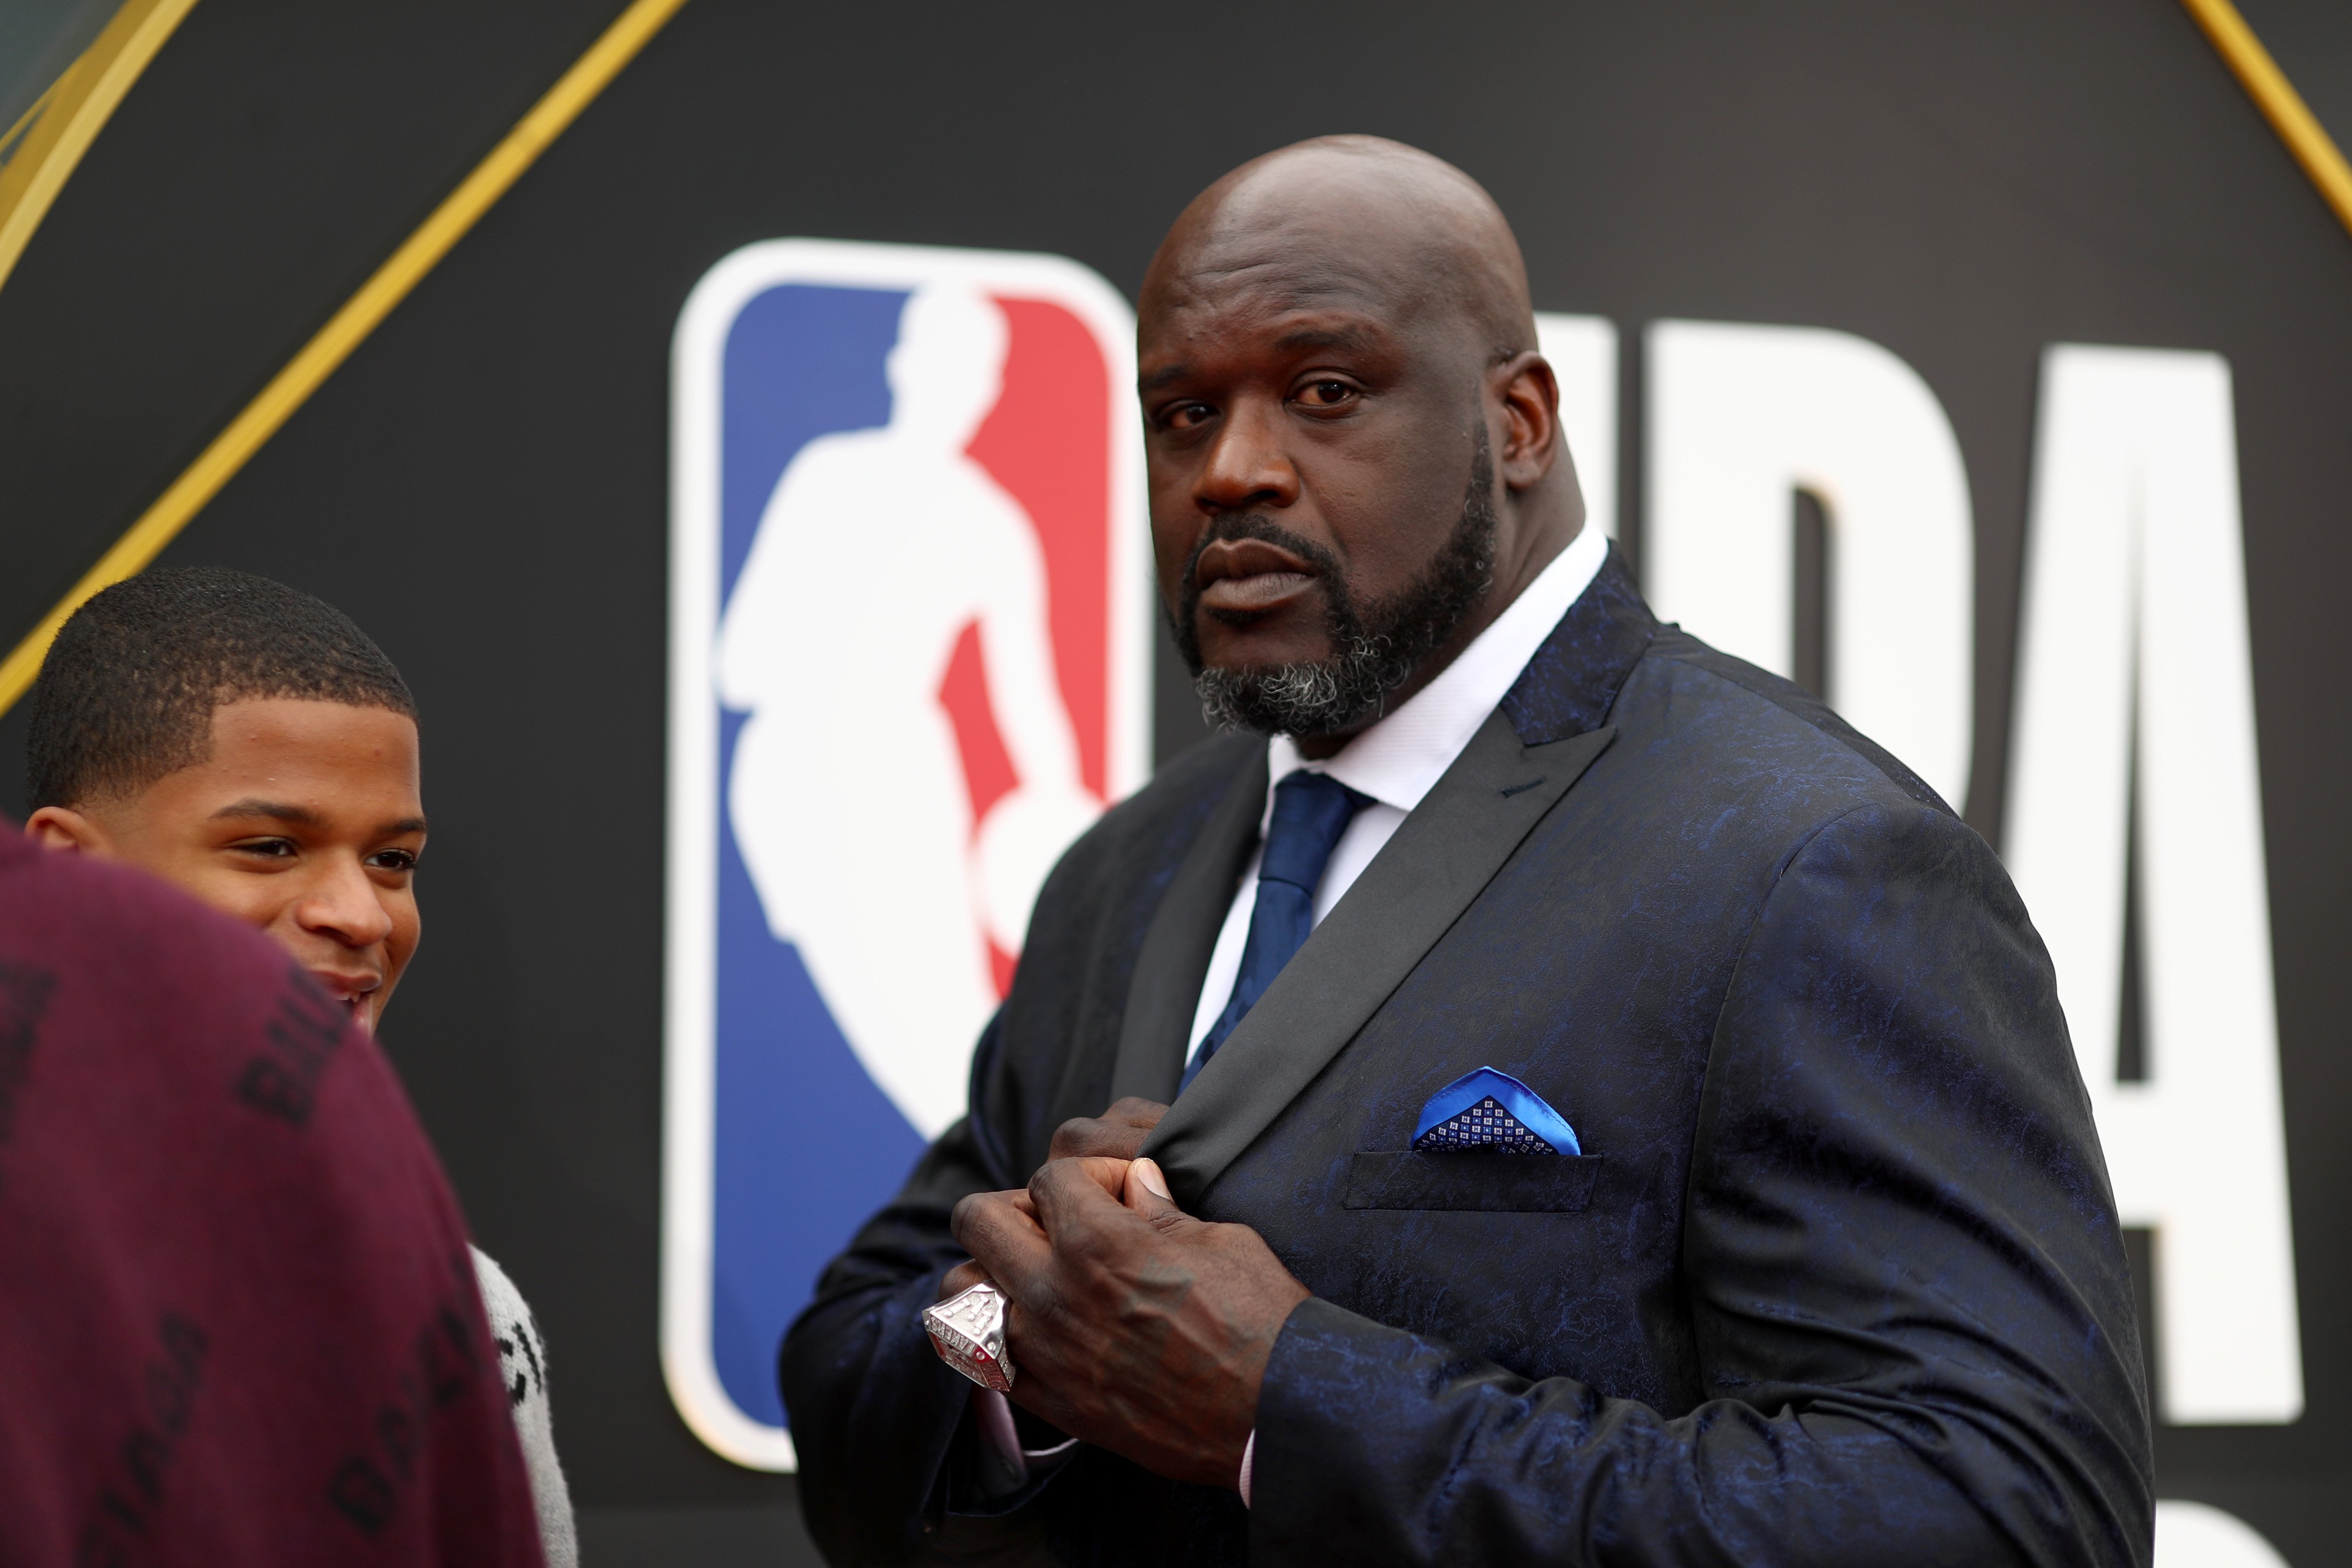 Shaquille O'Neal at the 2019 NBA Awards in June 2019. | Photo: Getty Images